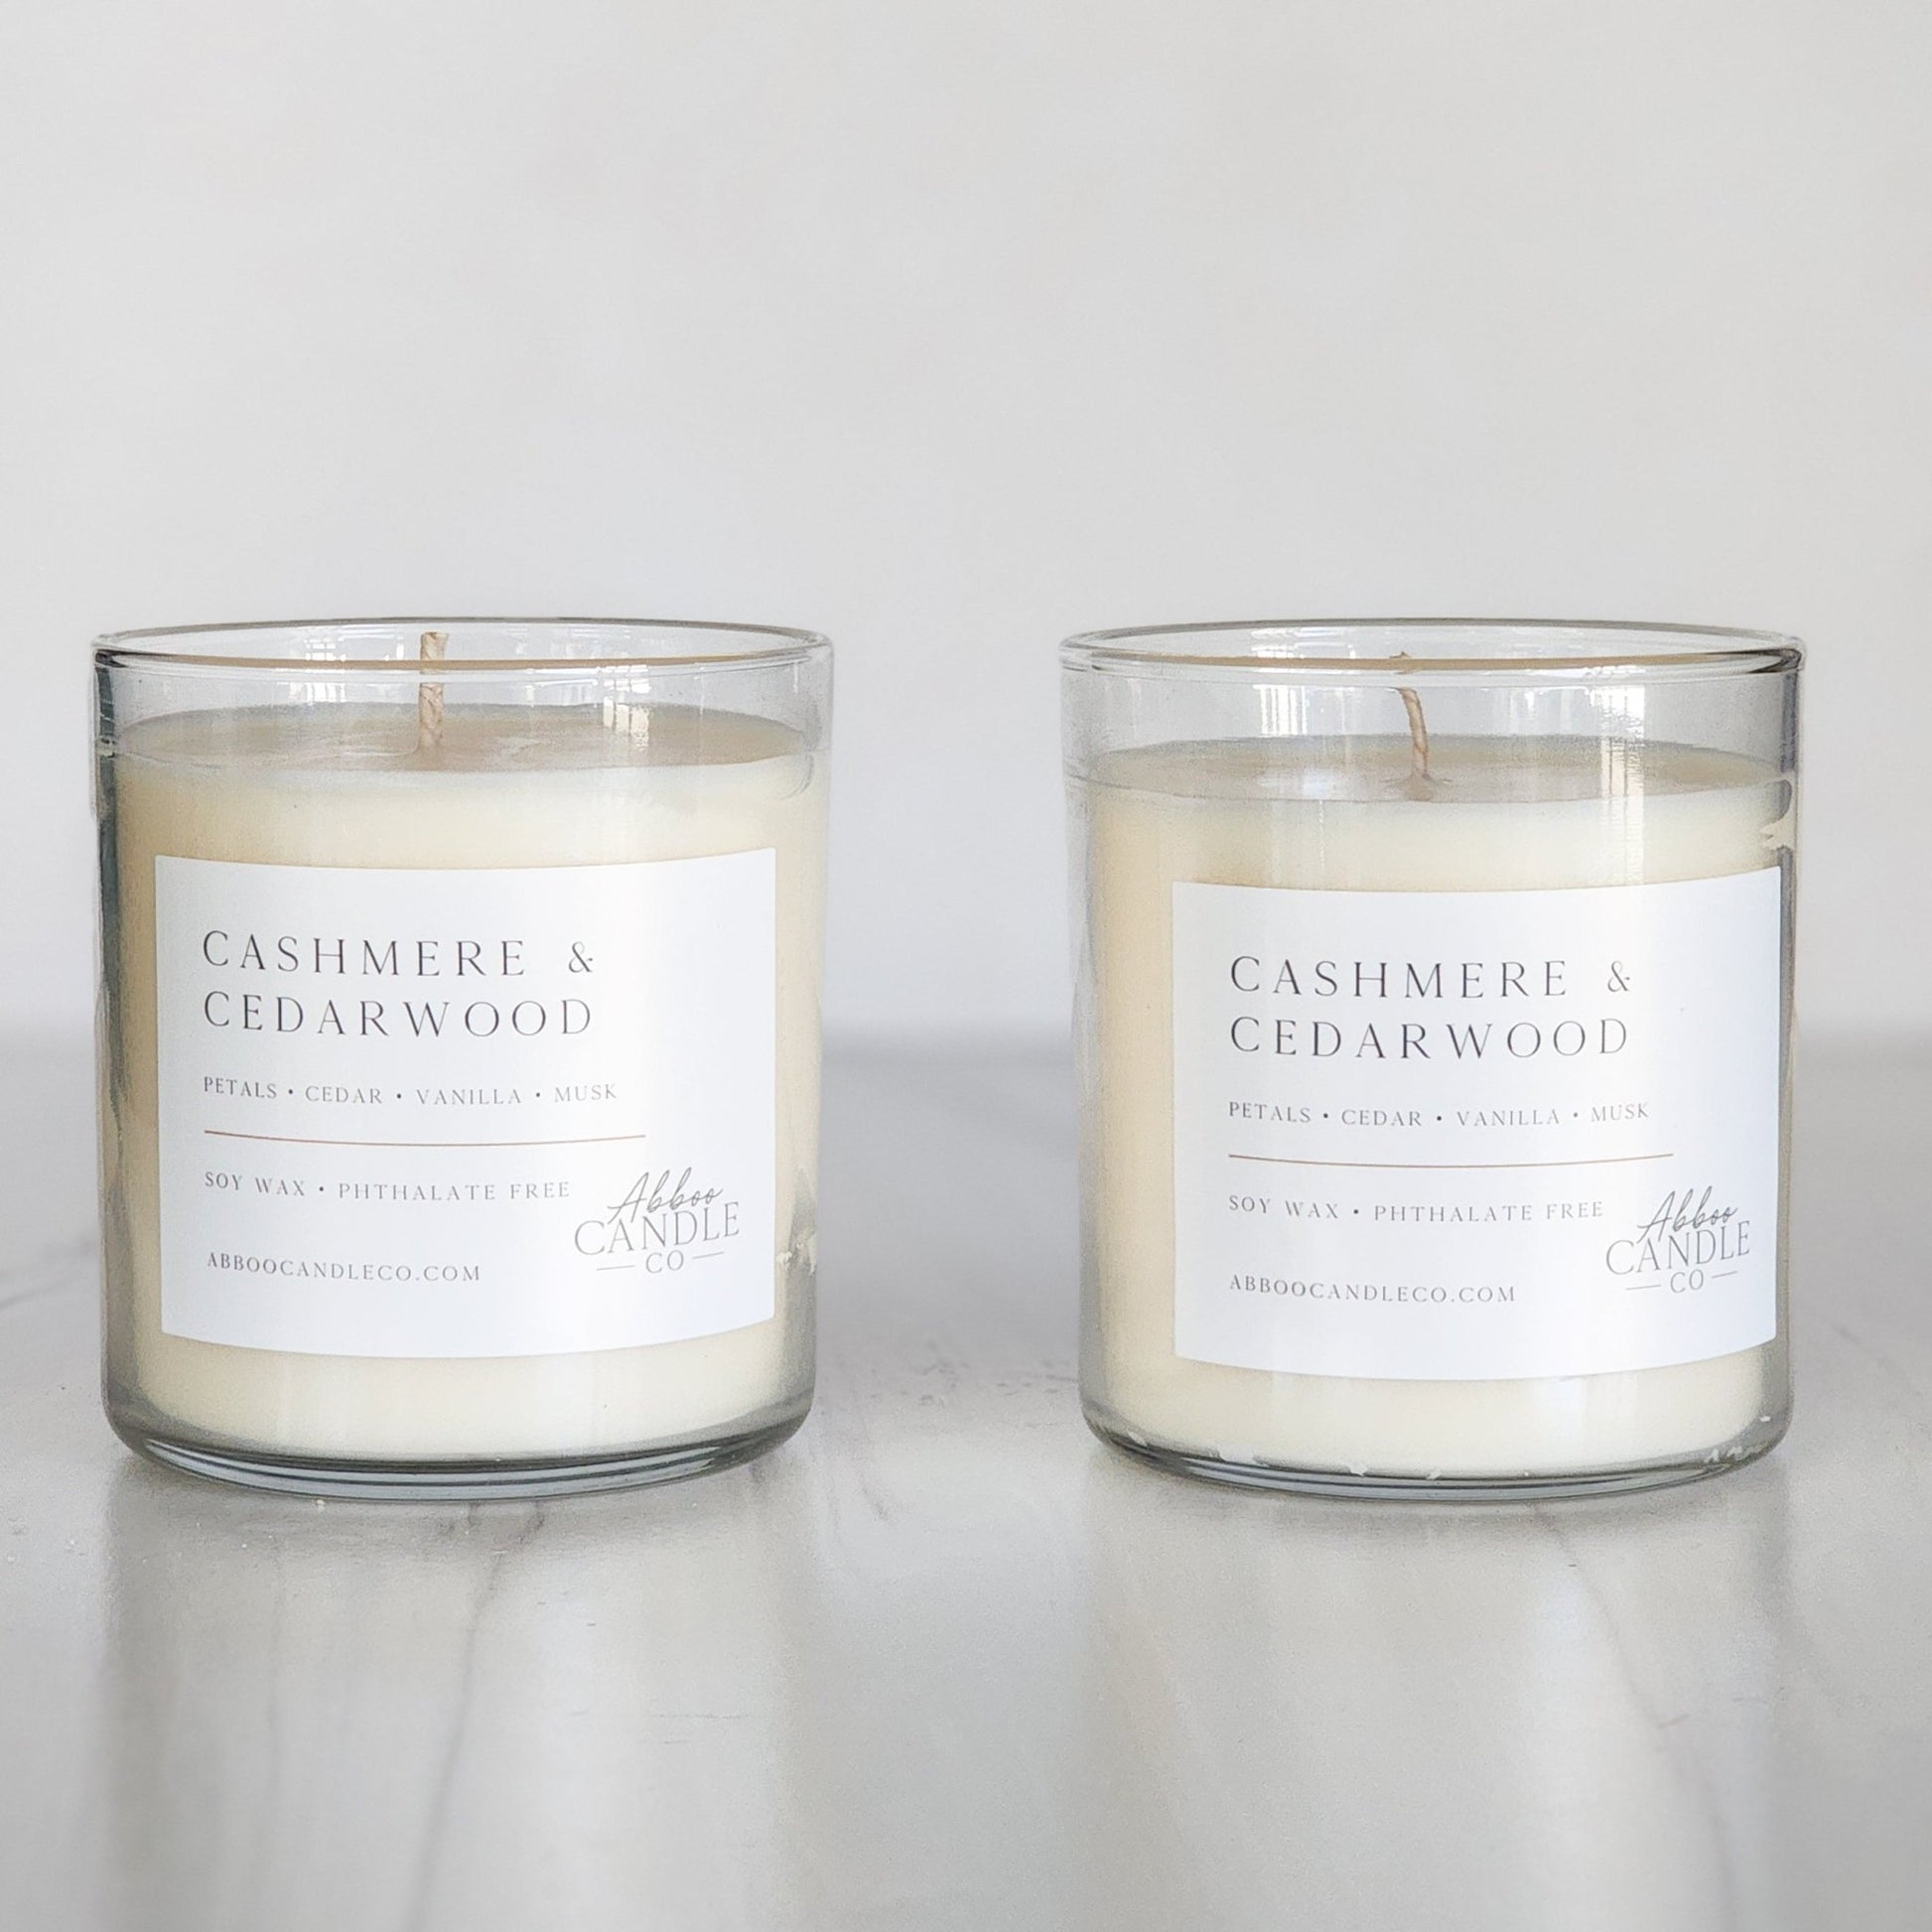 Cashmere and Cedarwood Soy Candle Bundle - Abboo Candle Co